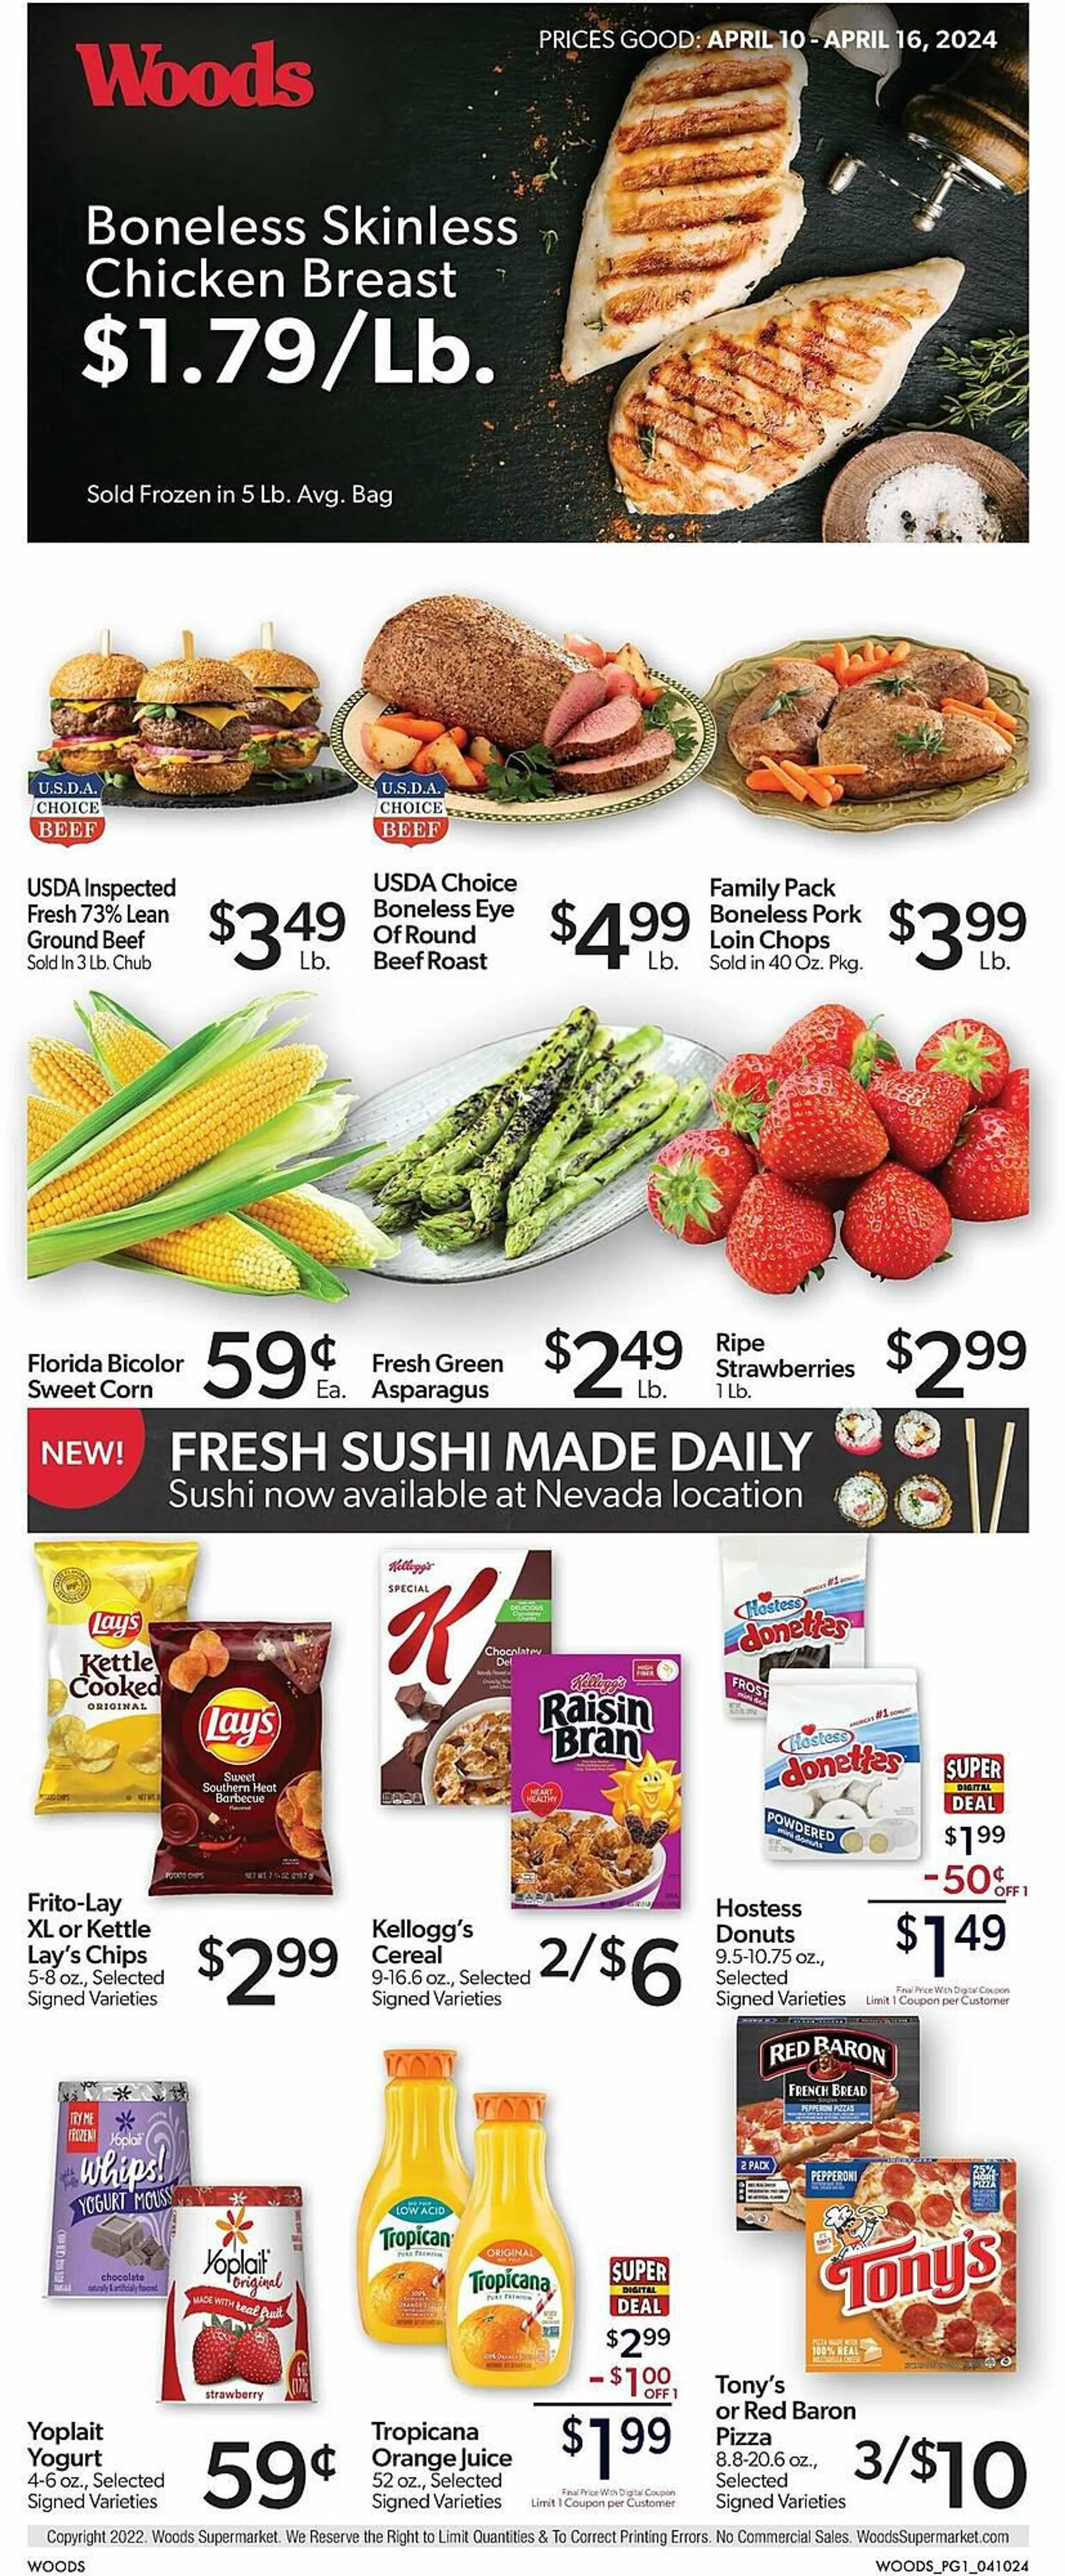 Weekly ad Woods Supermarket Weekly Ad from April 10 to April 16 2024 - Page 1